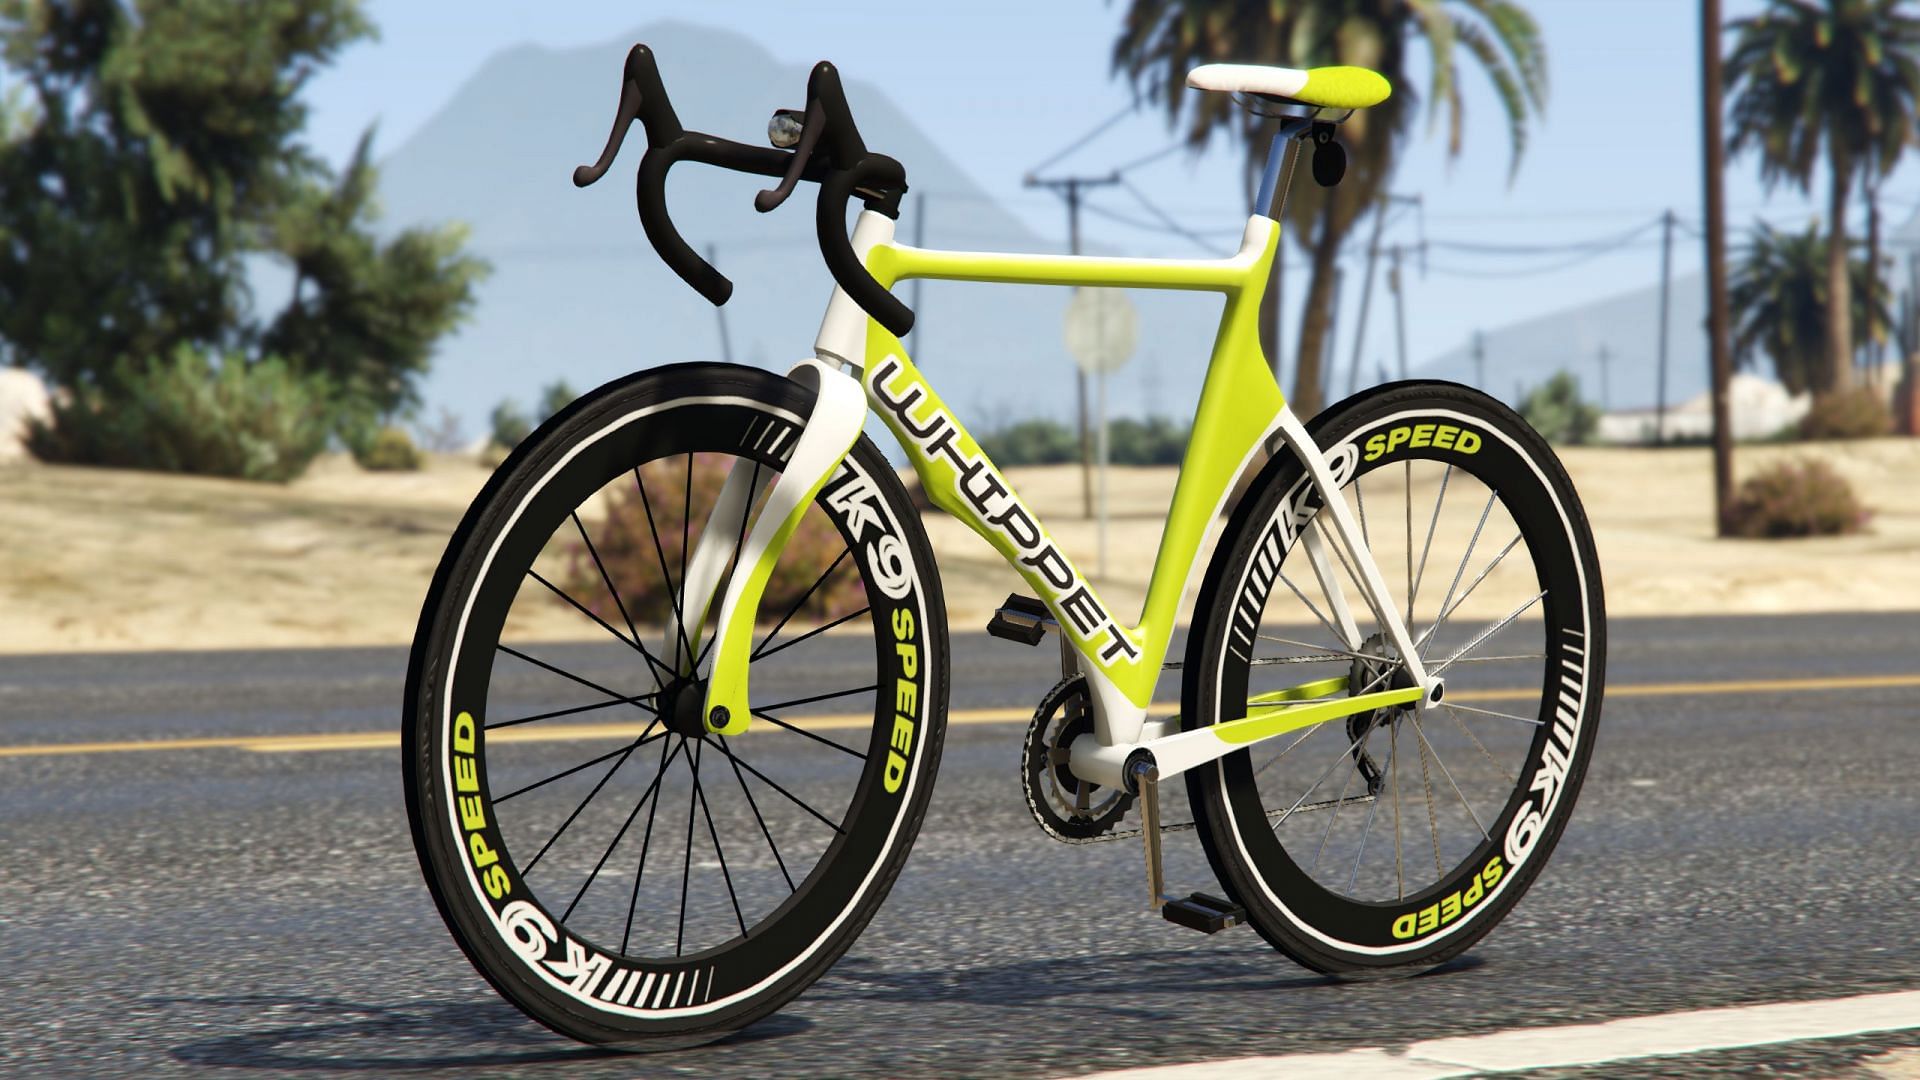 Using a bicycle regularly is a terrific way to stay healthy (Image via Rockstar Games)